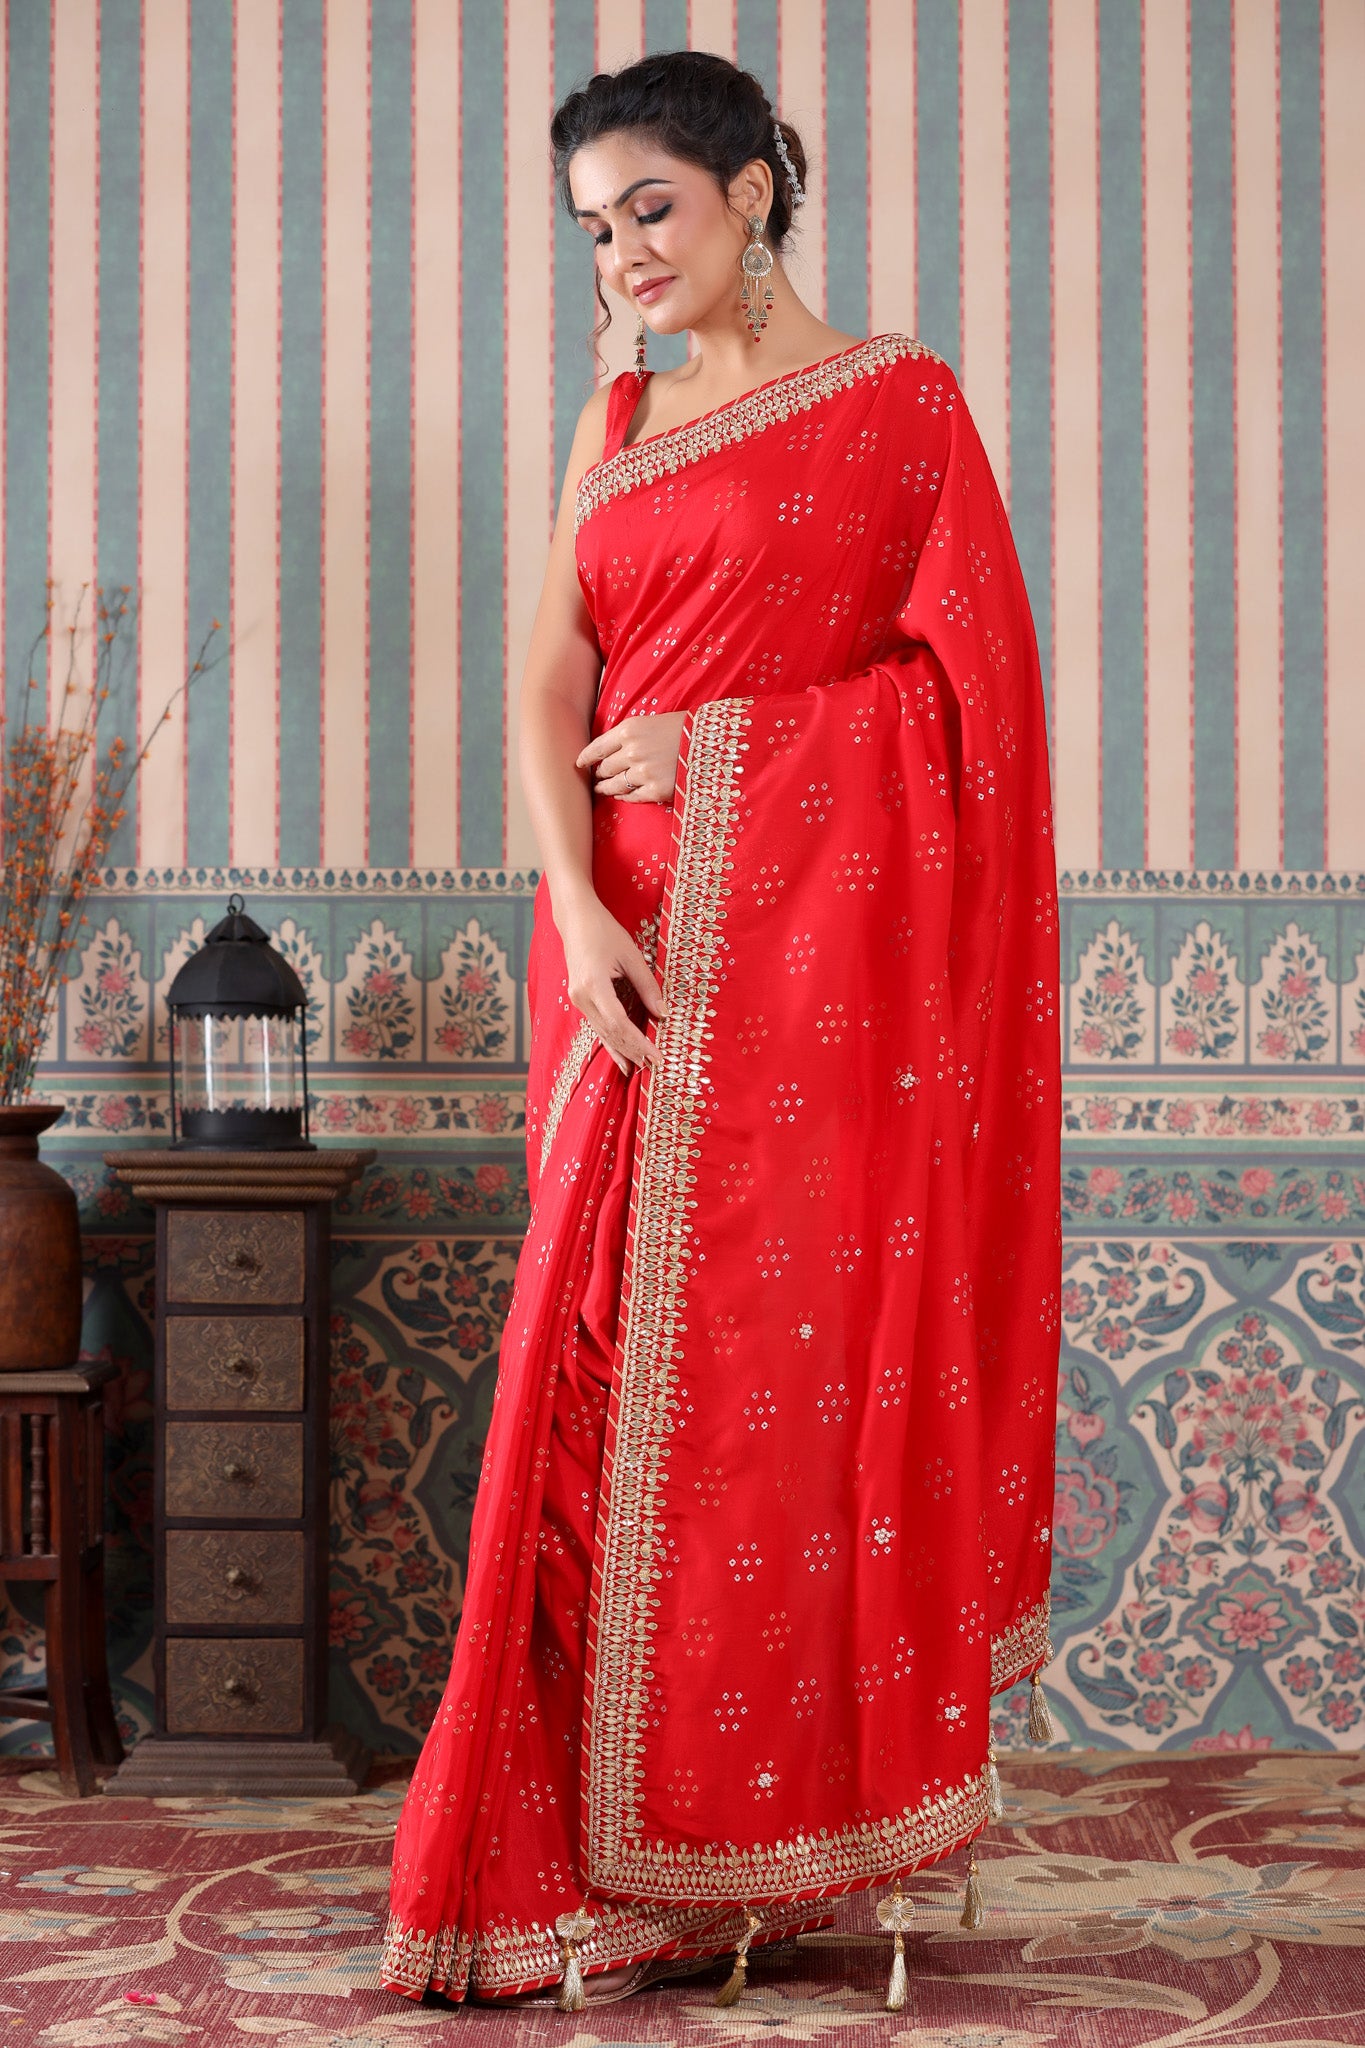 Buy stunning bright red embroidered georgette saree online in USA. Make a fashion statement at weddings with stunning designer sarees, embroidered sarees with blouse, wedding sarees, handloom sarees from Pure Elegance Indian fashion store in USA.-pallu